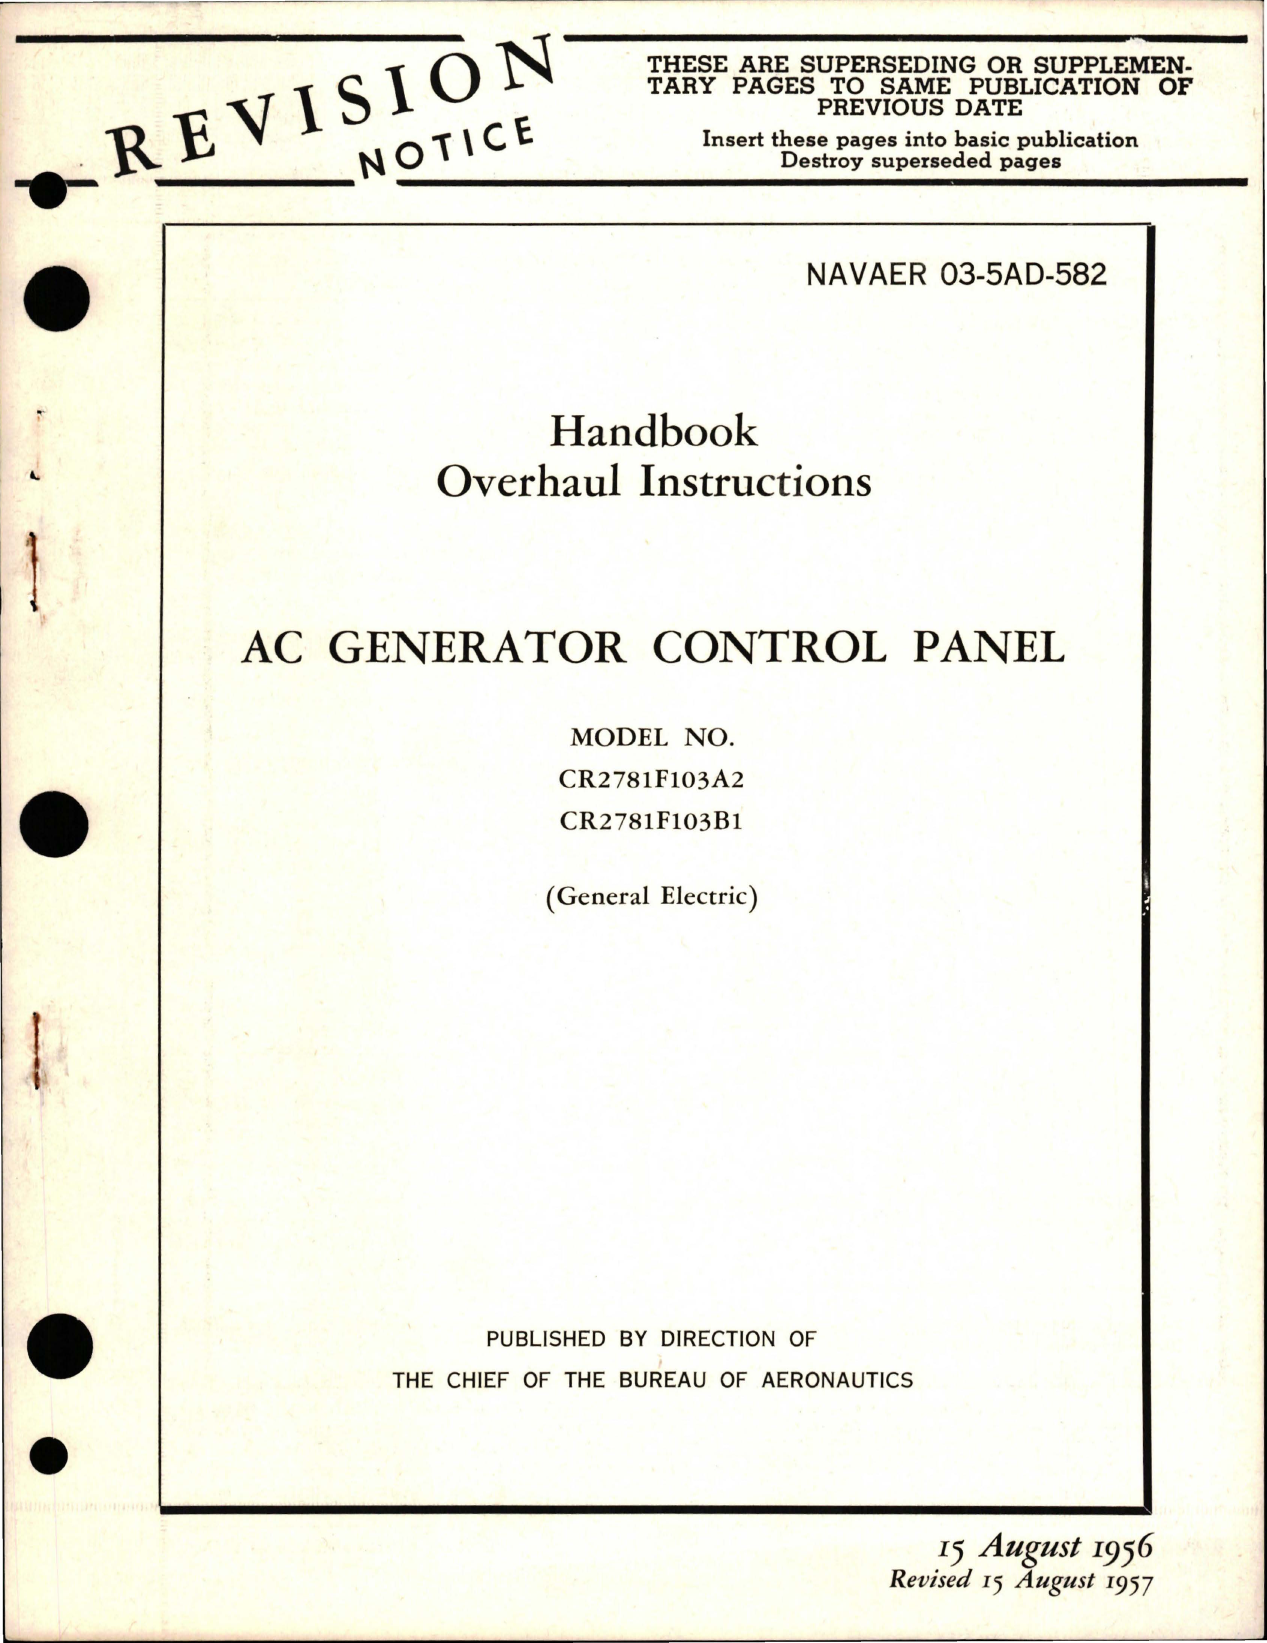 Sample page 1 from AirCorps Library document: Overhaul Instructions for AC Generator Control Panel - Model CR2781F103A2 and CR2781F103B1